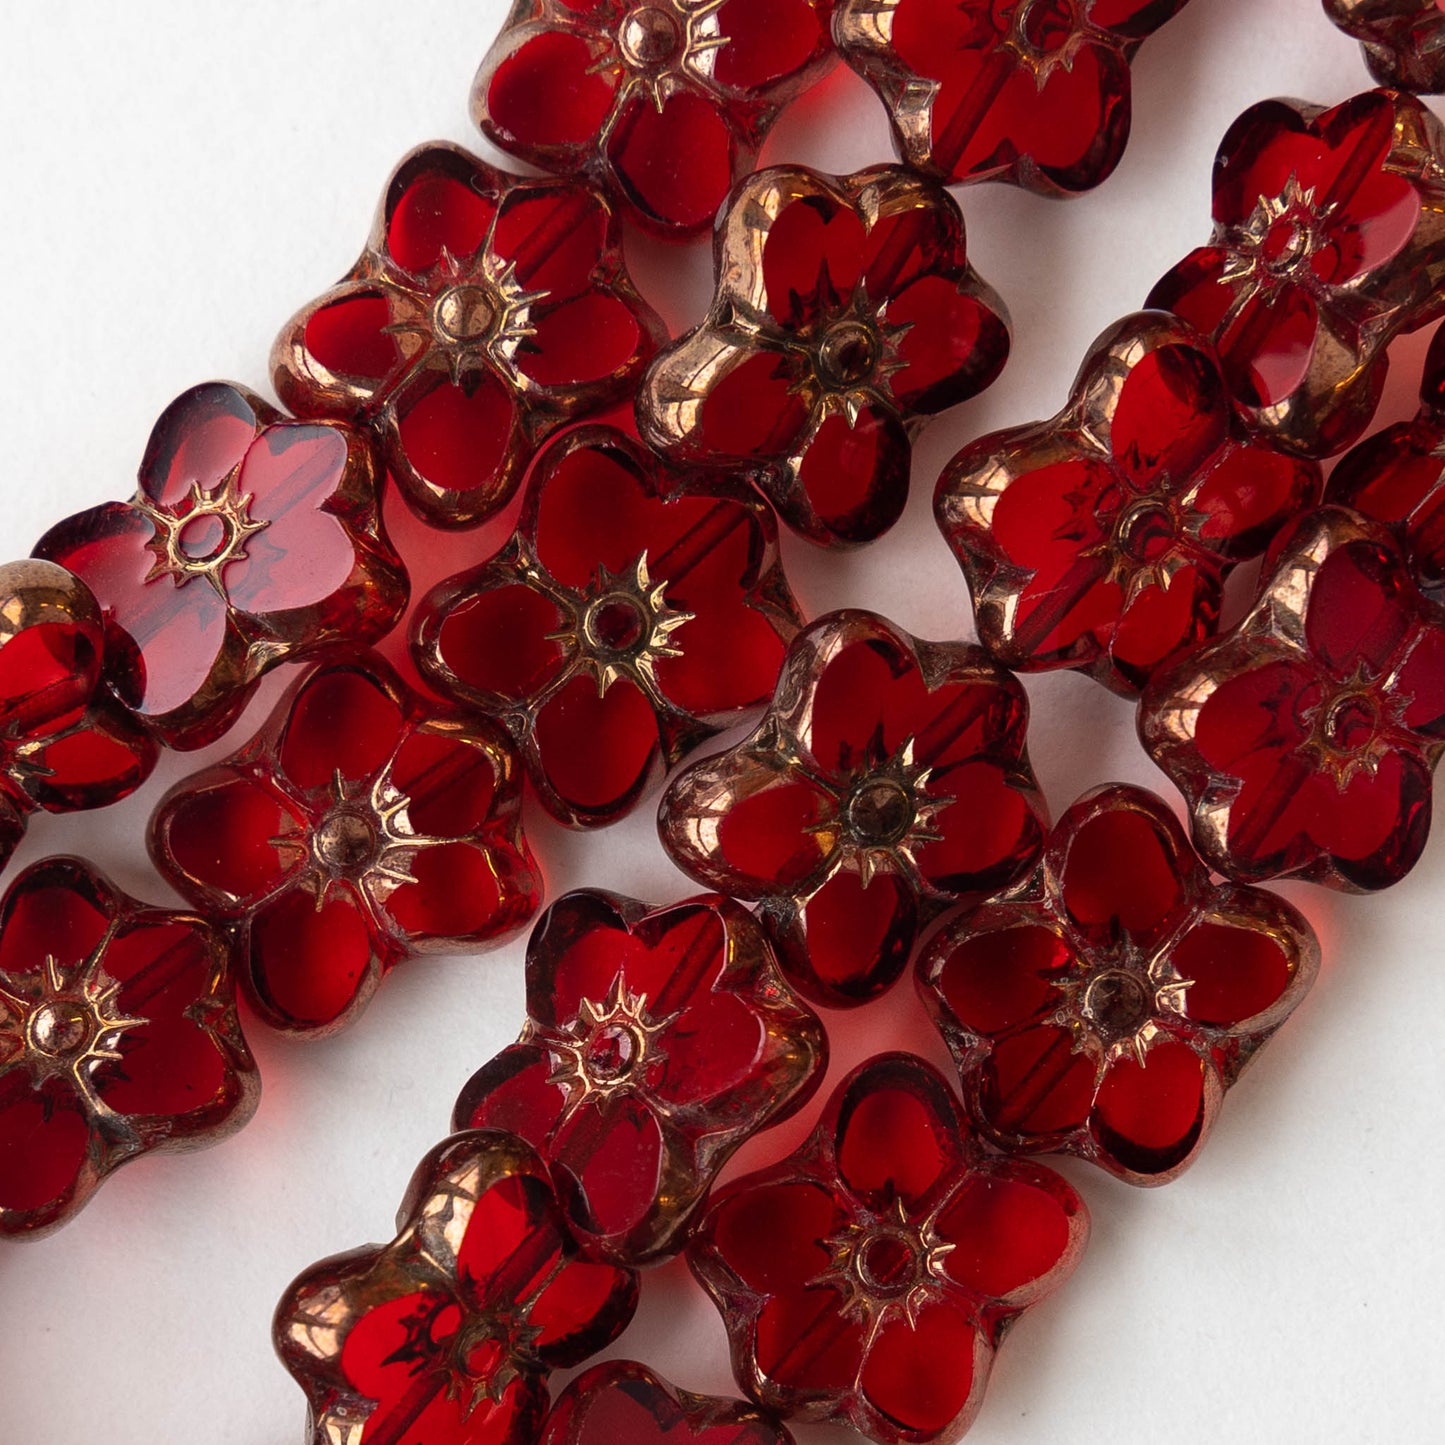 12x14mm Flower Beads - Ruby Red with Copper Wash - 10 Beads